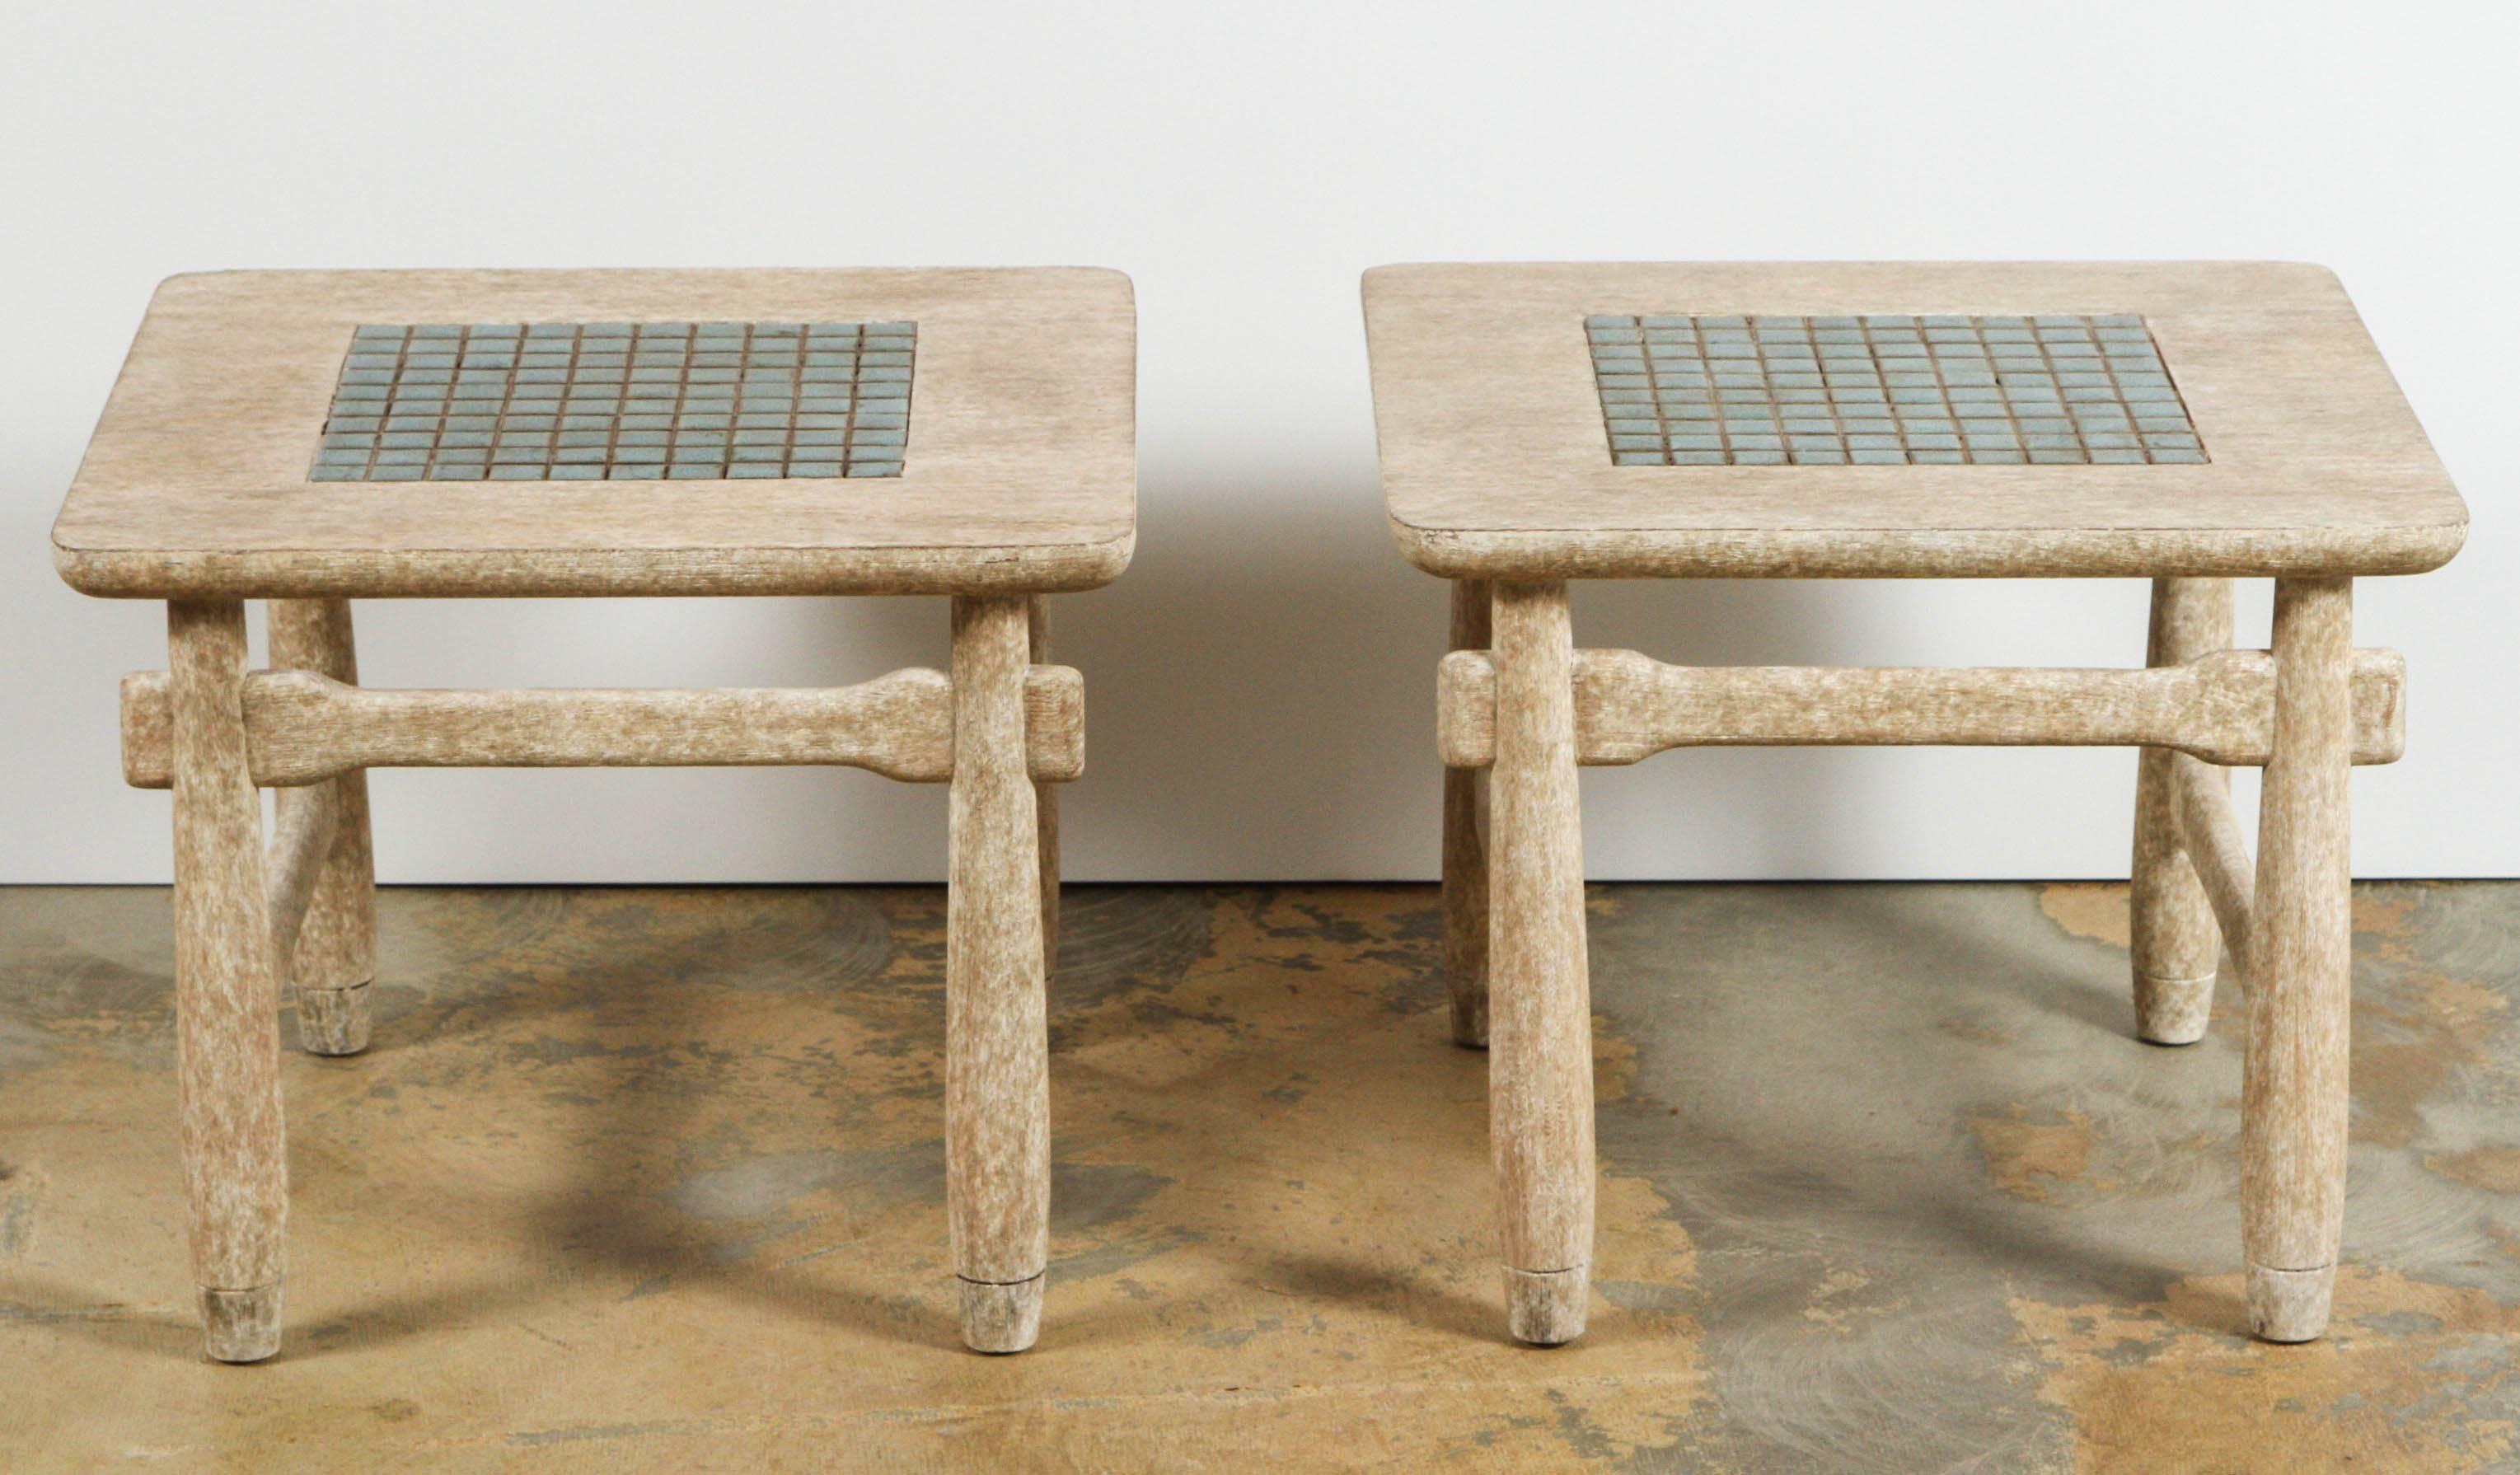 A pair of Mid-Century Lane tables with inset mosaic tile (in blue hues) and in new distressed finish.